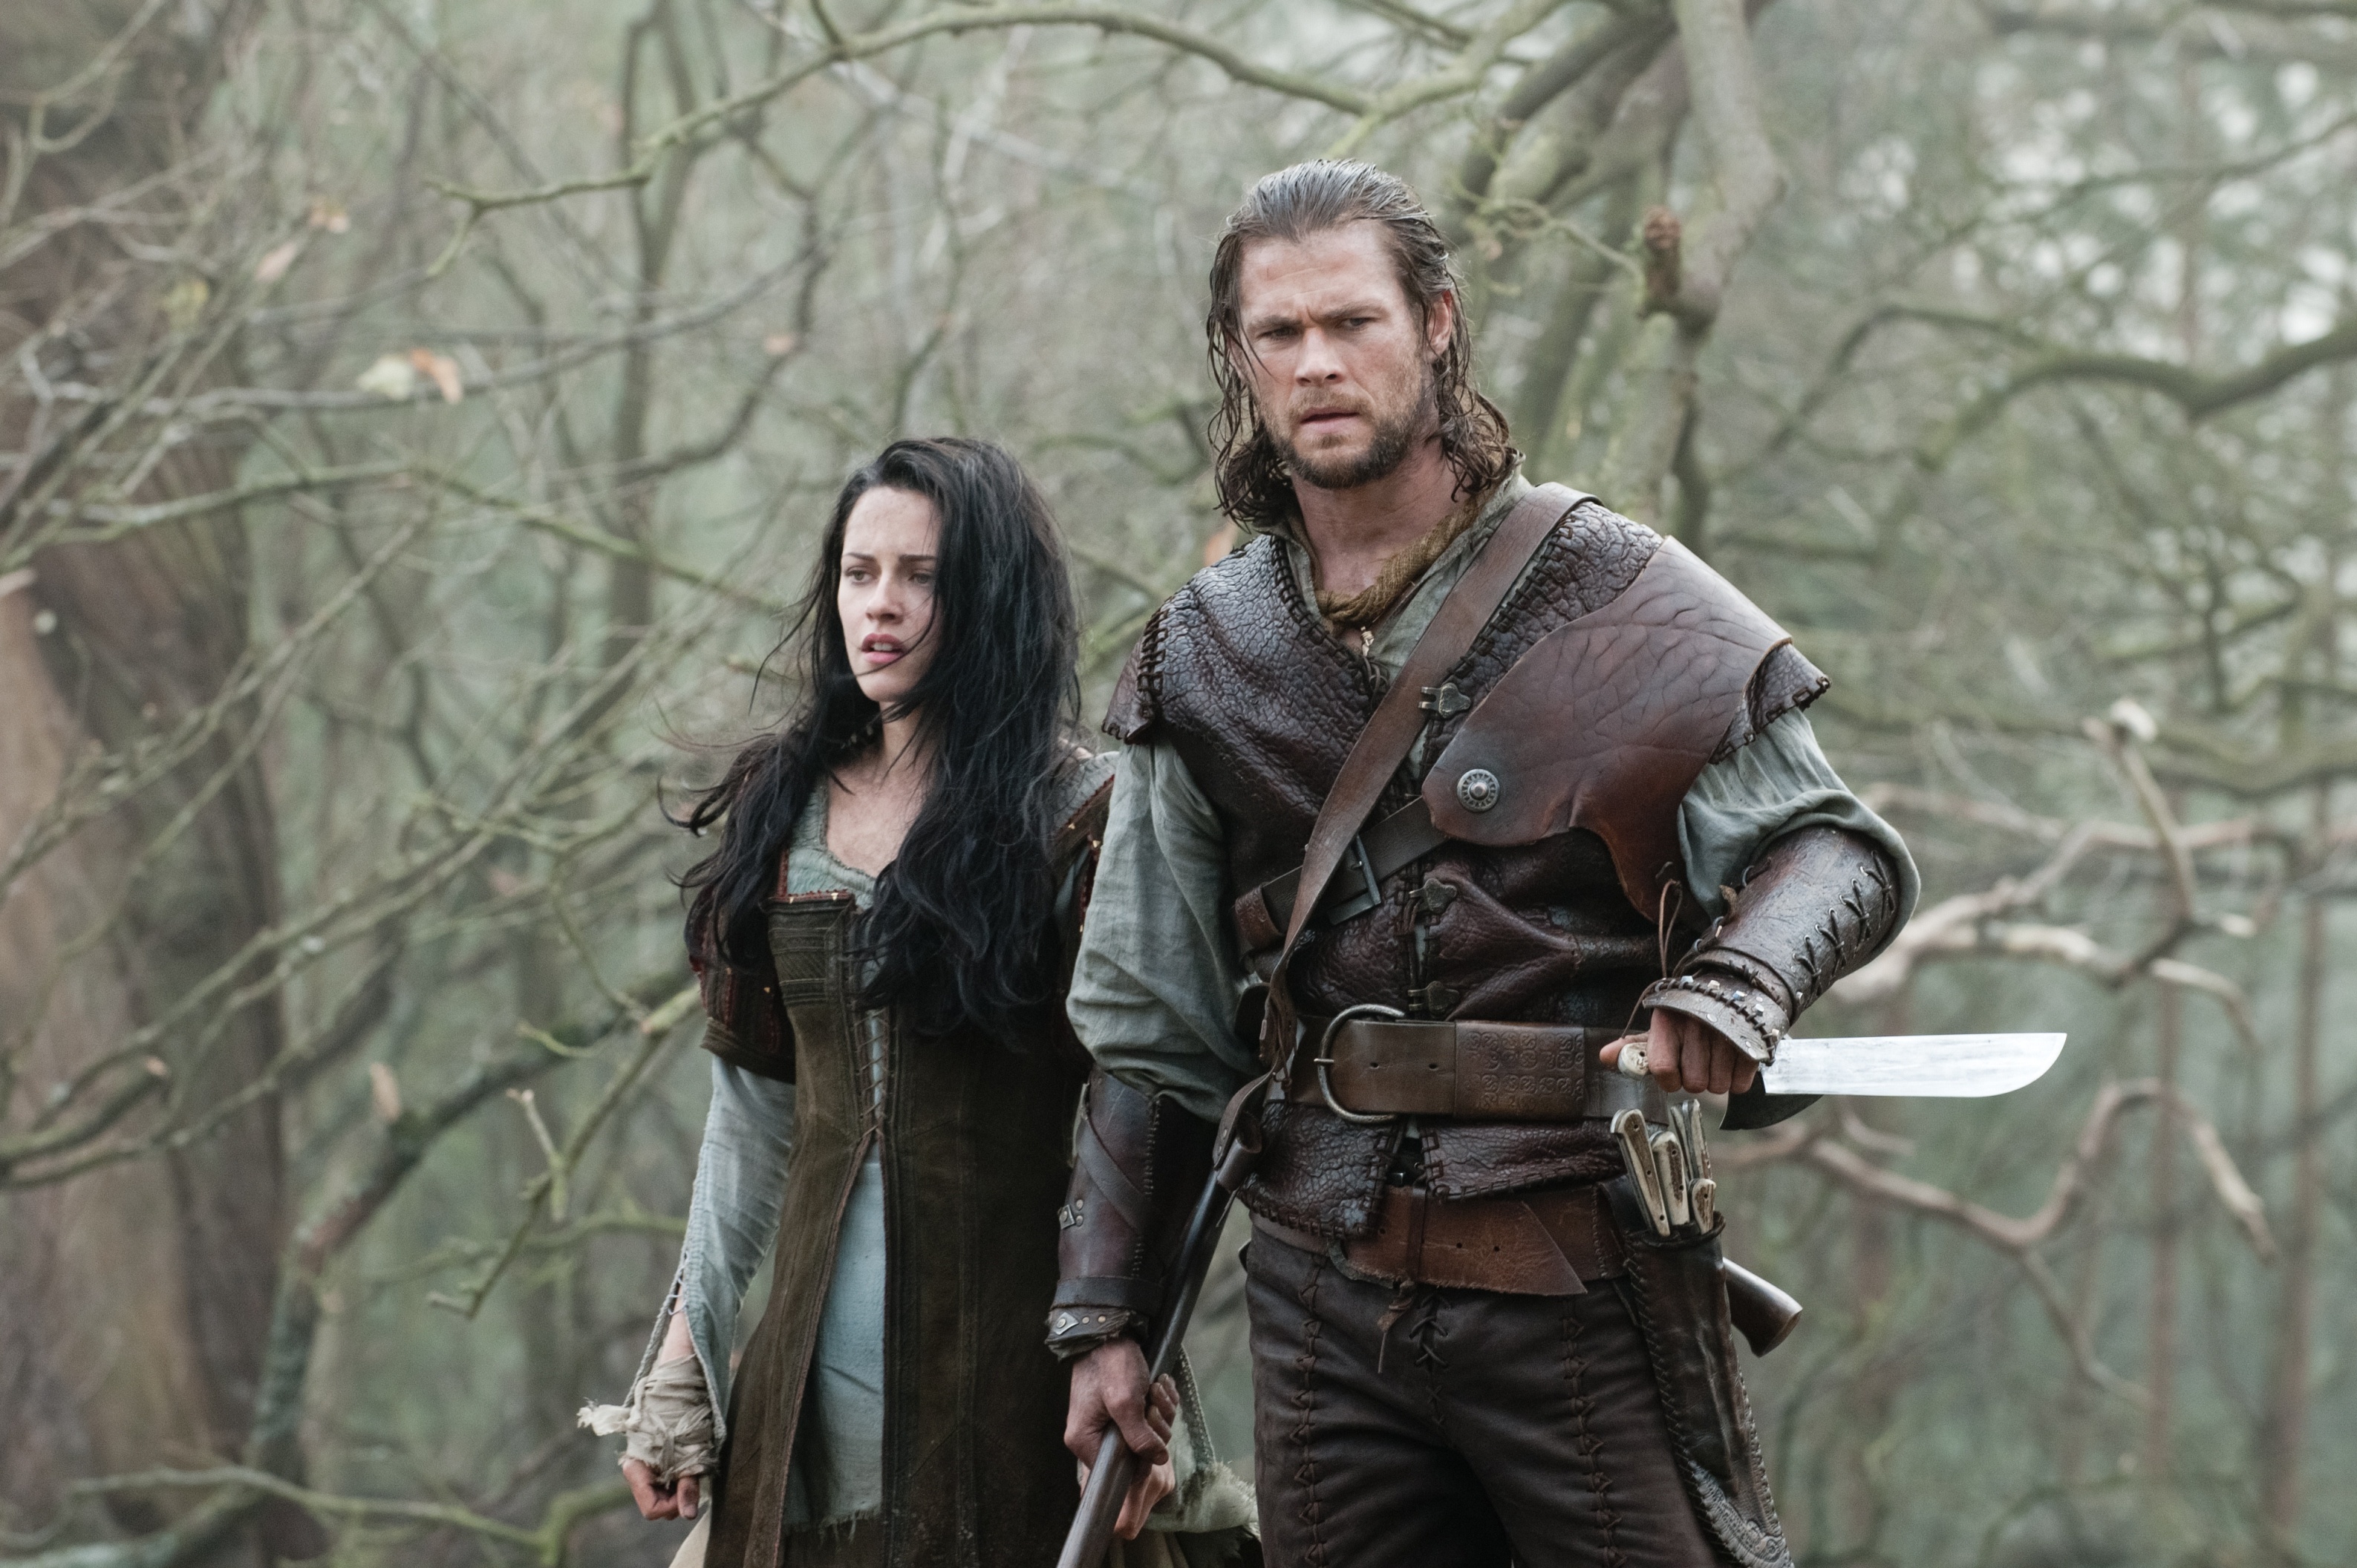 Snow White and the Huntsman, HD wallpapers, Background images, Movie, 3180x2120 HD Desktop